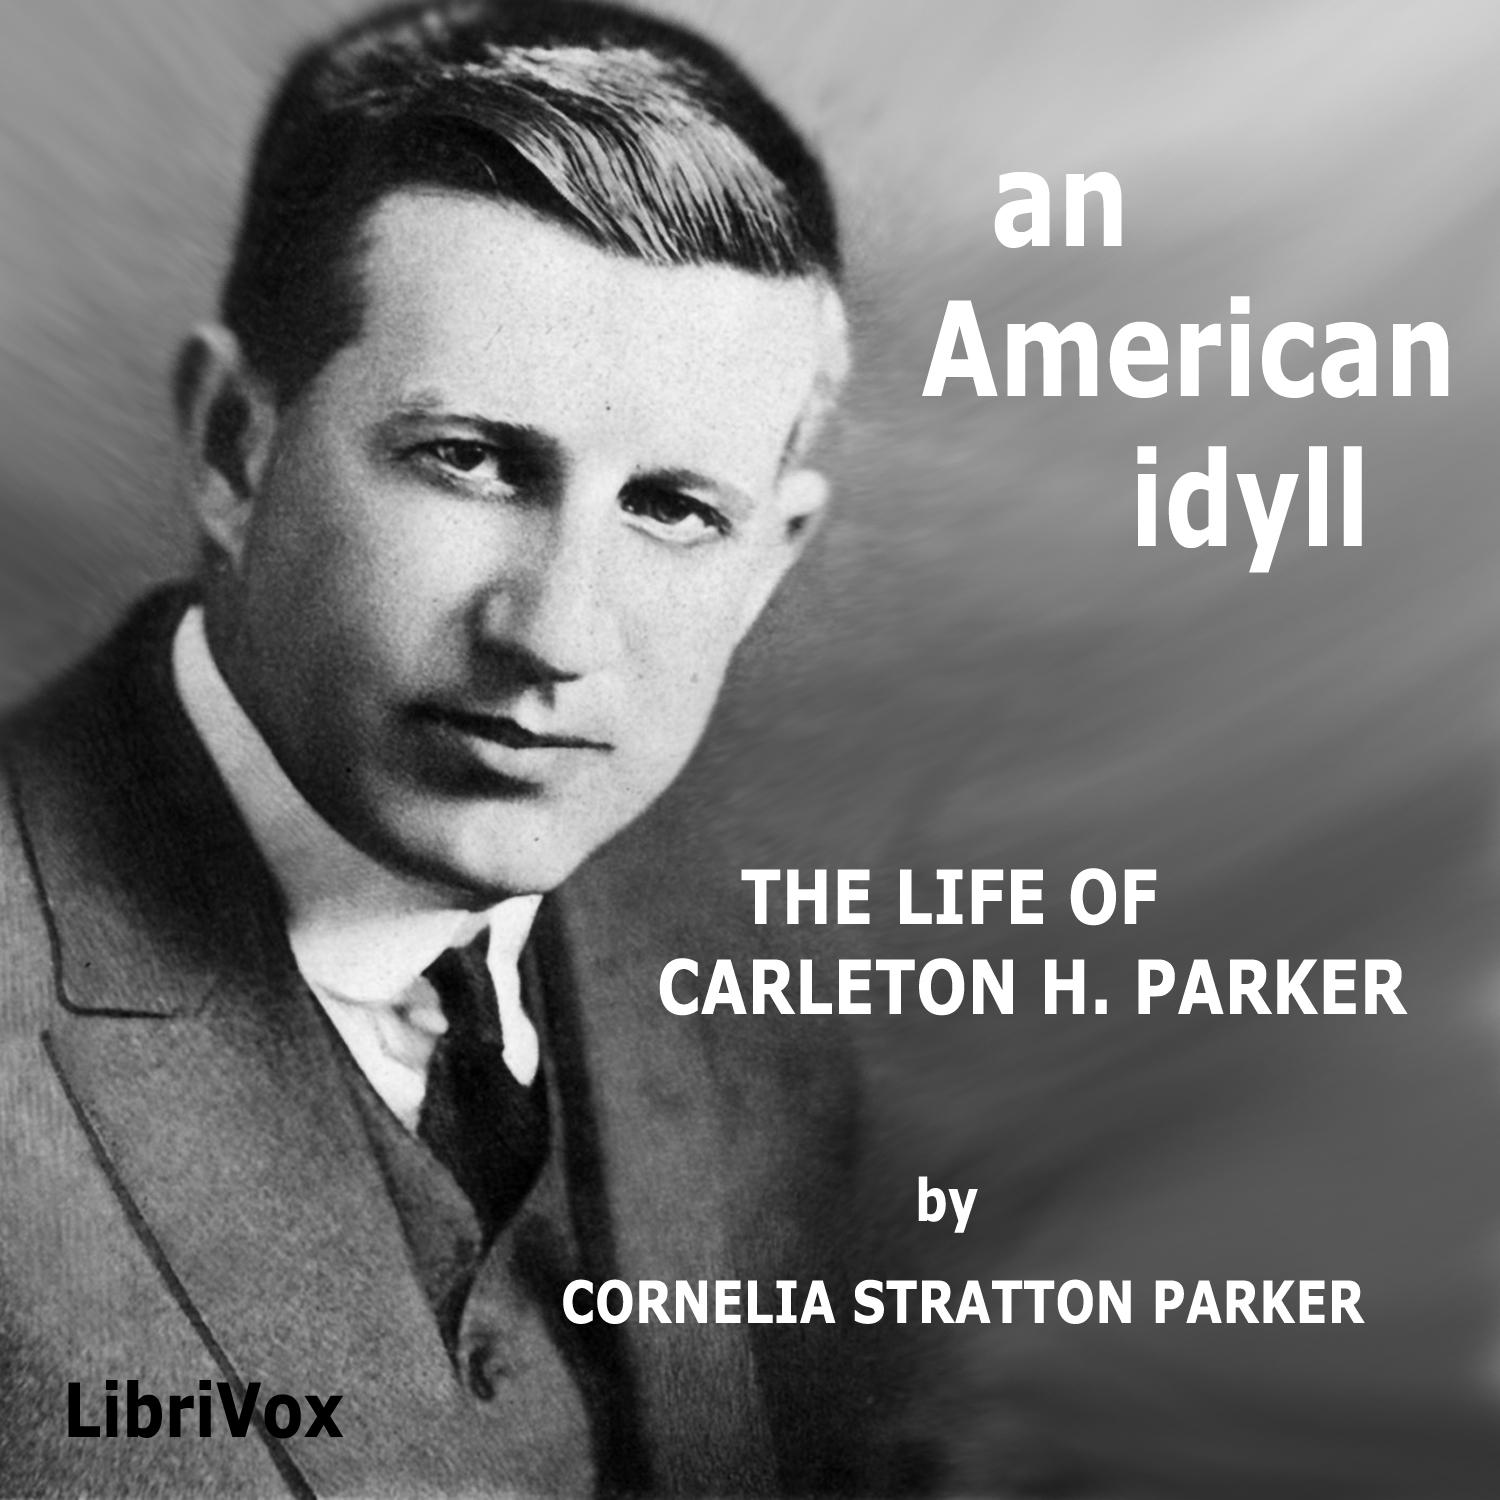 An American Idyll: The Life of Carlton H. Parker, #13 - Chapter XII